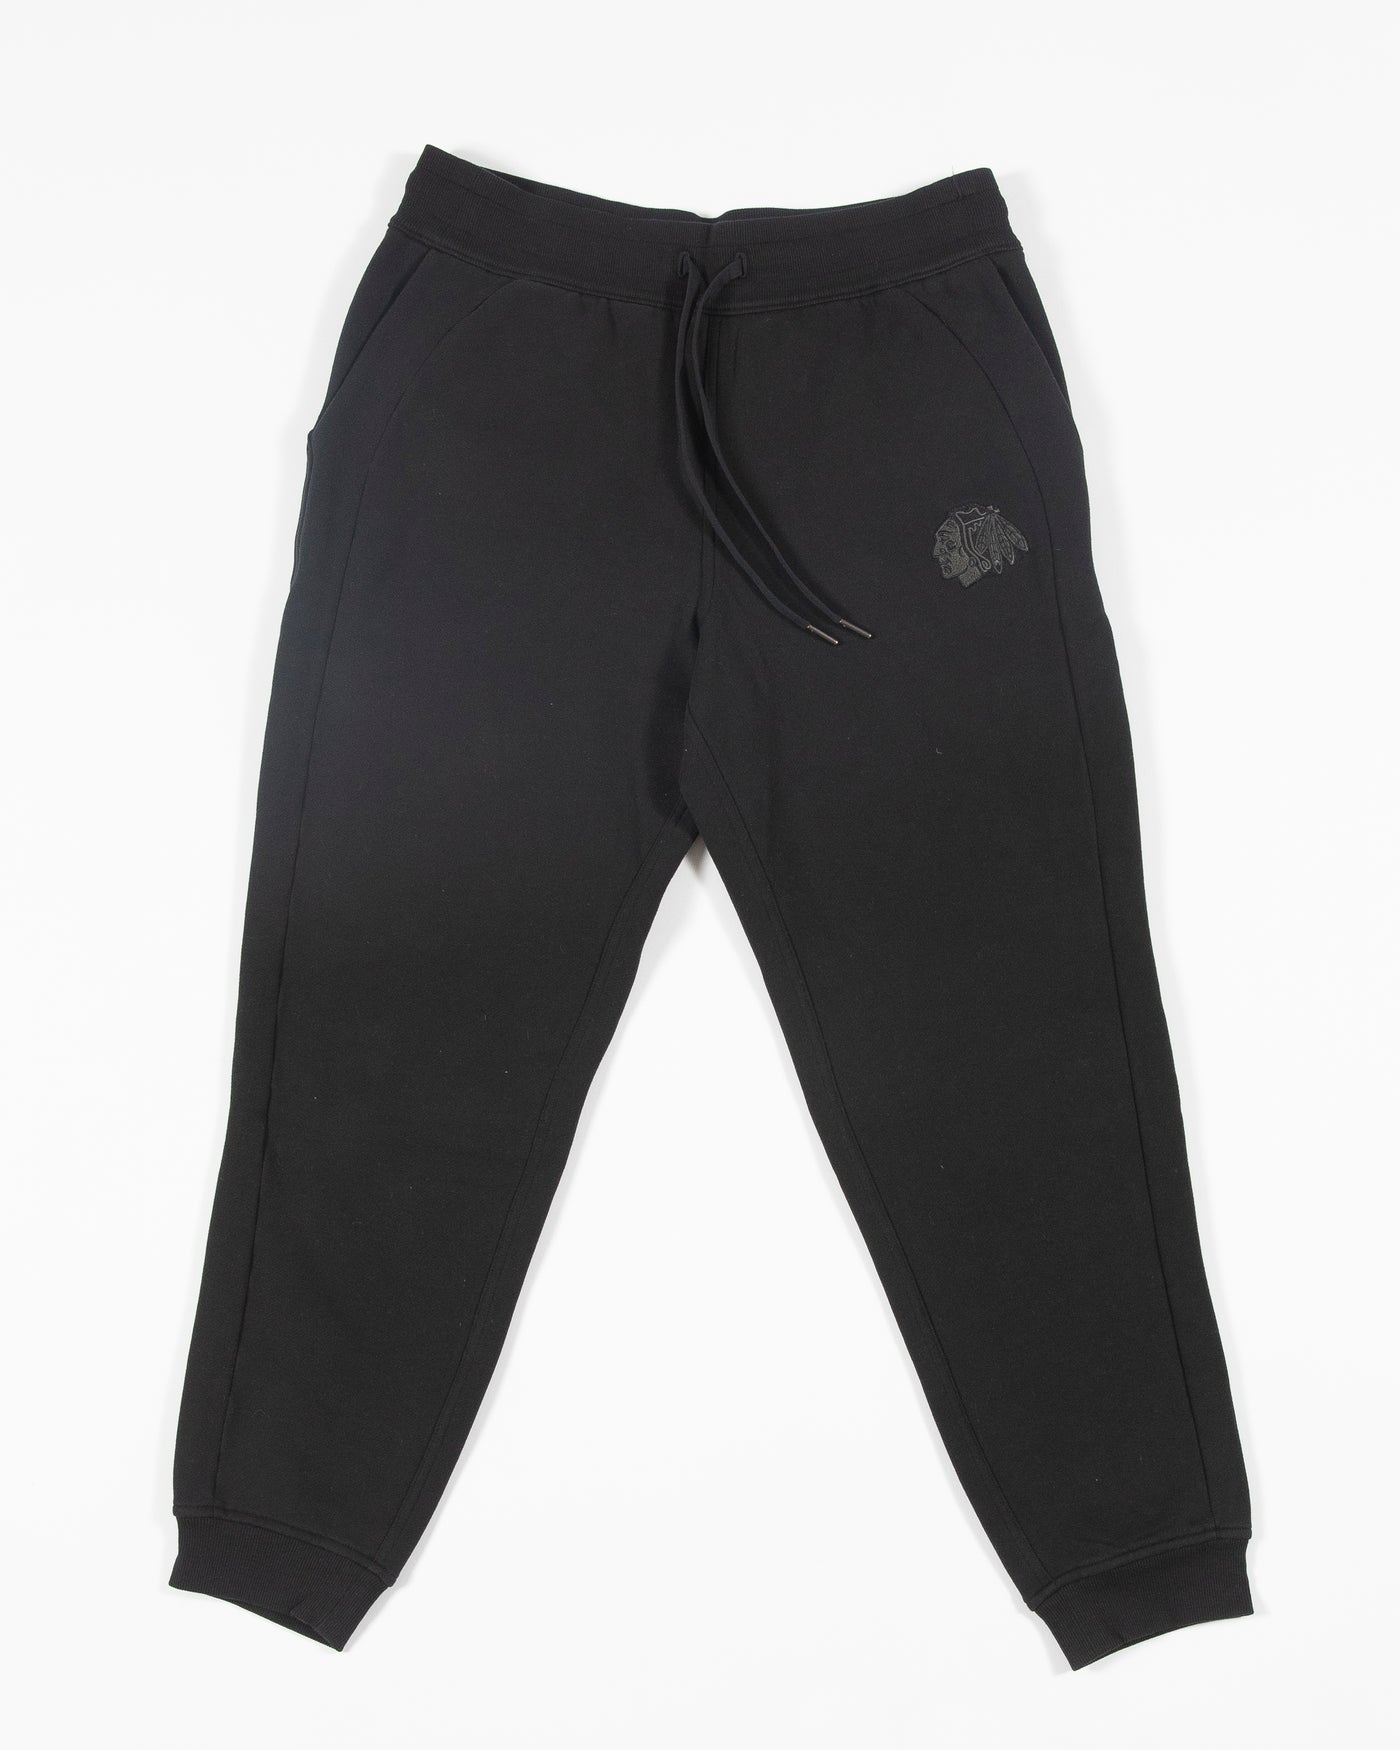 Lululemon High-Rise Scuba Joggers Black Size 2 - $59 - From Lilly